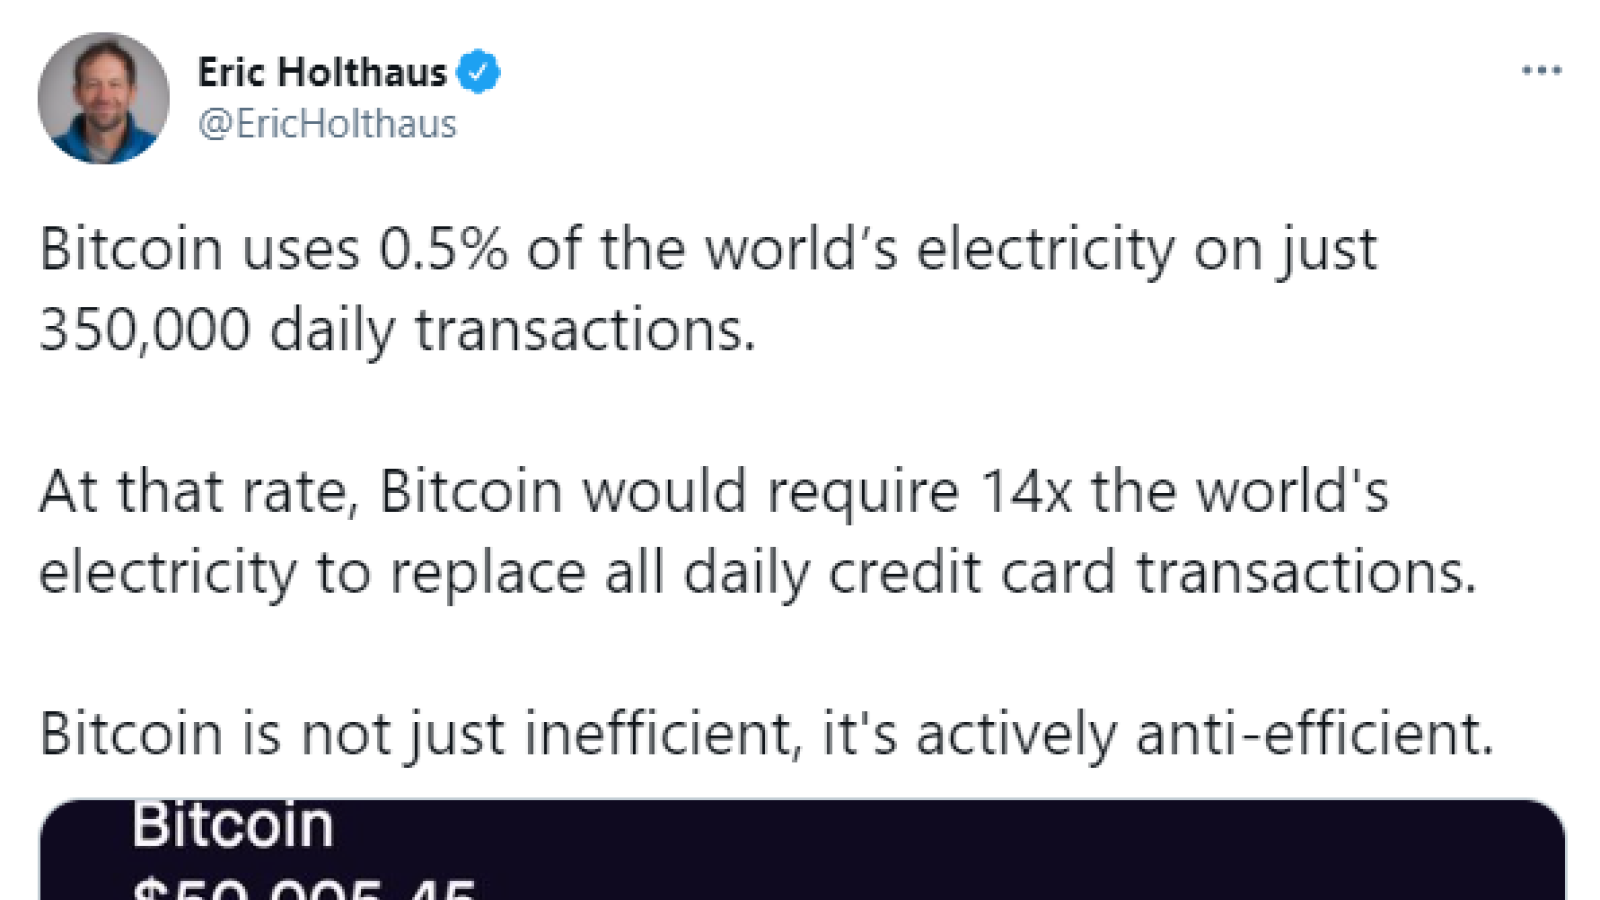 Eric Holthaus claims Bitcoin in aggressively anti-efficient